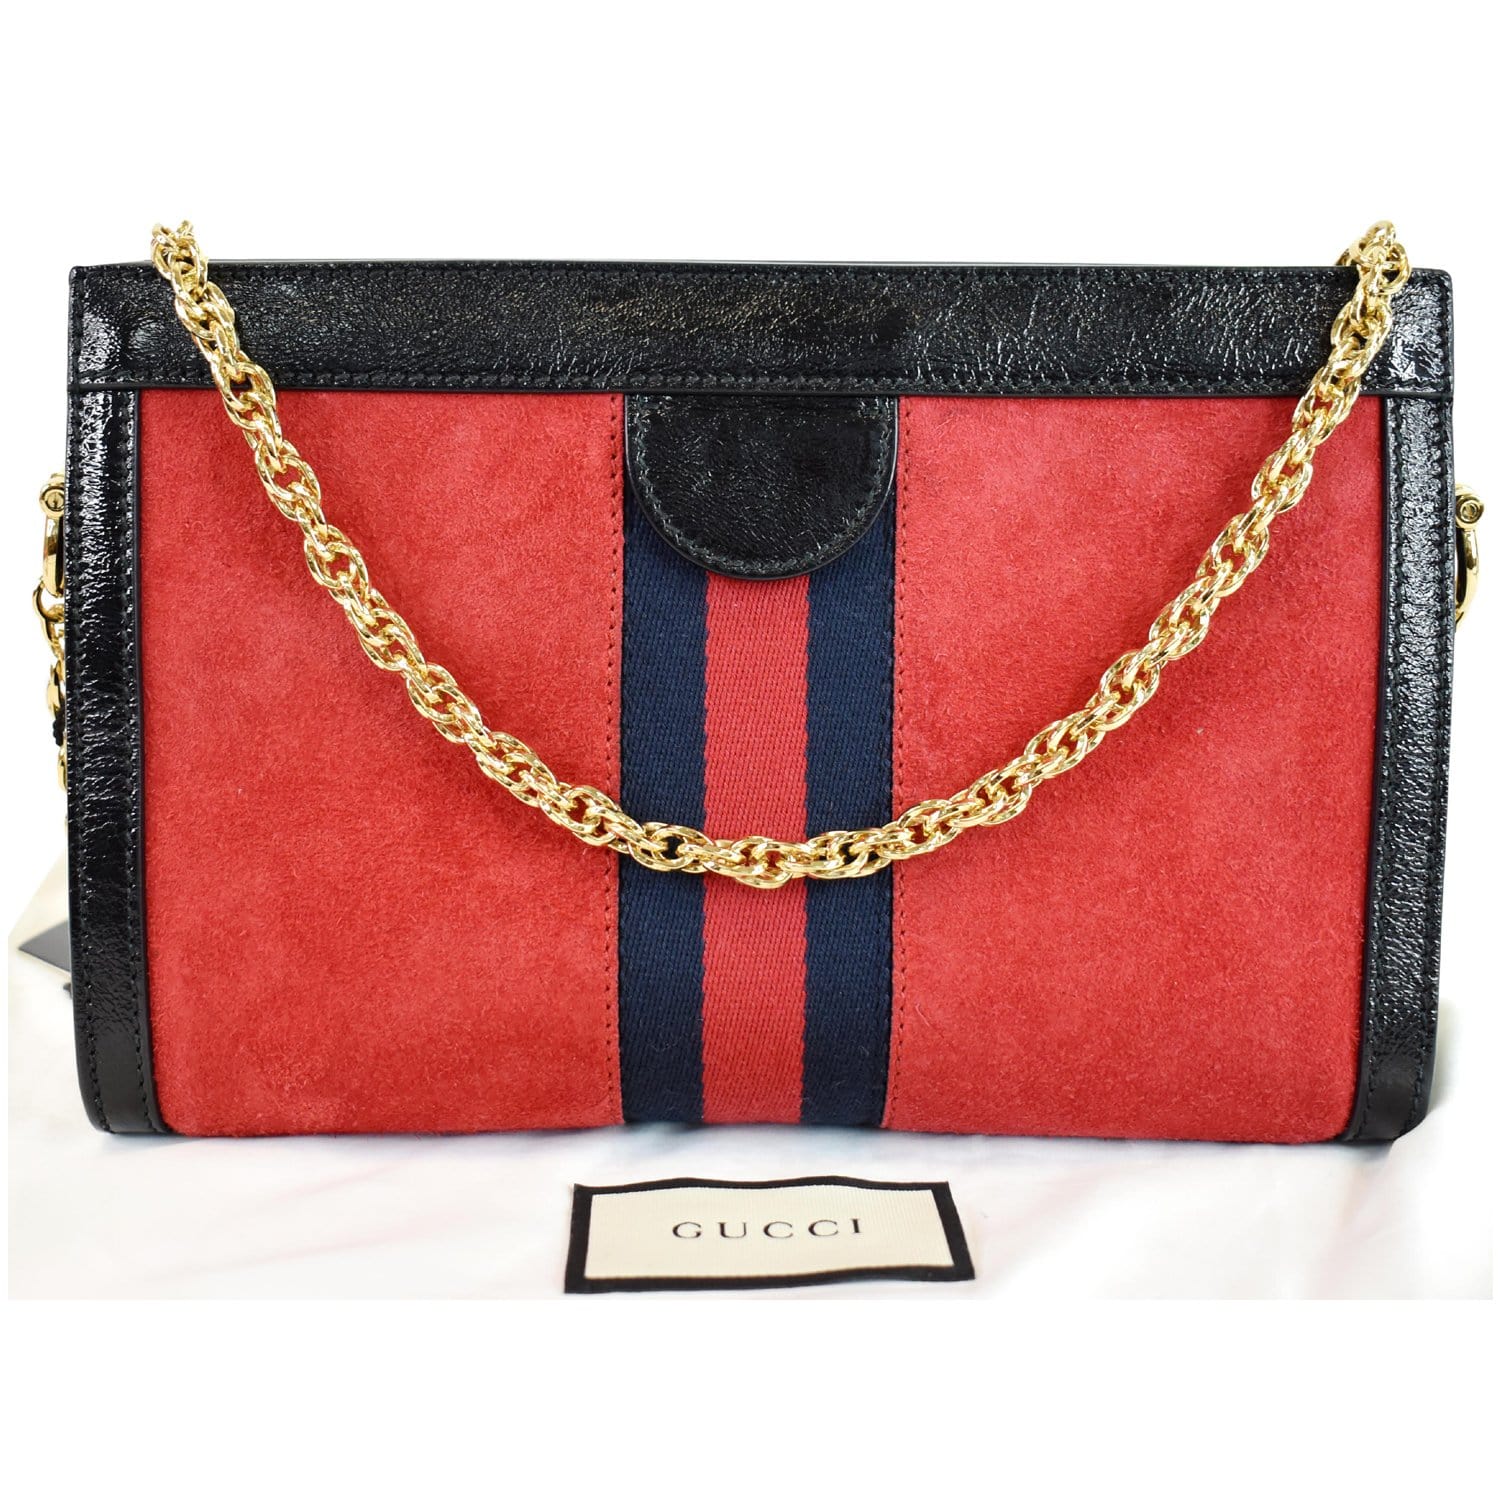 Gucci Ophidia GG Small Web Suede Leather Shoulder Bag